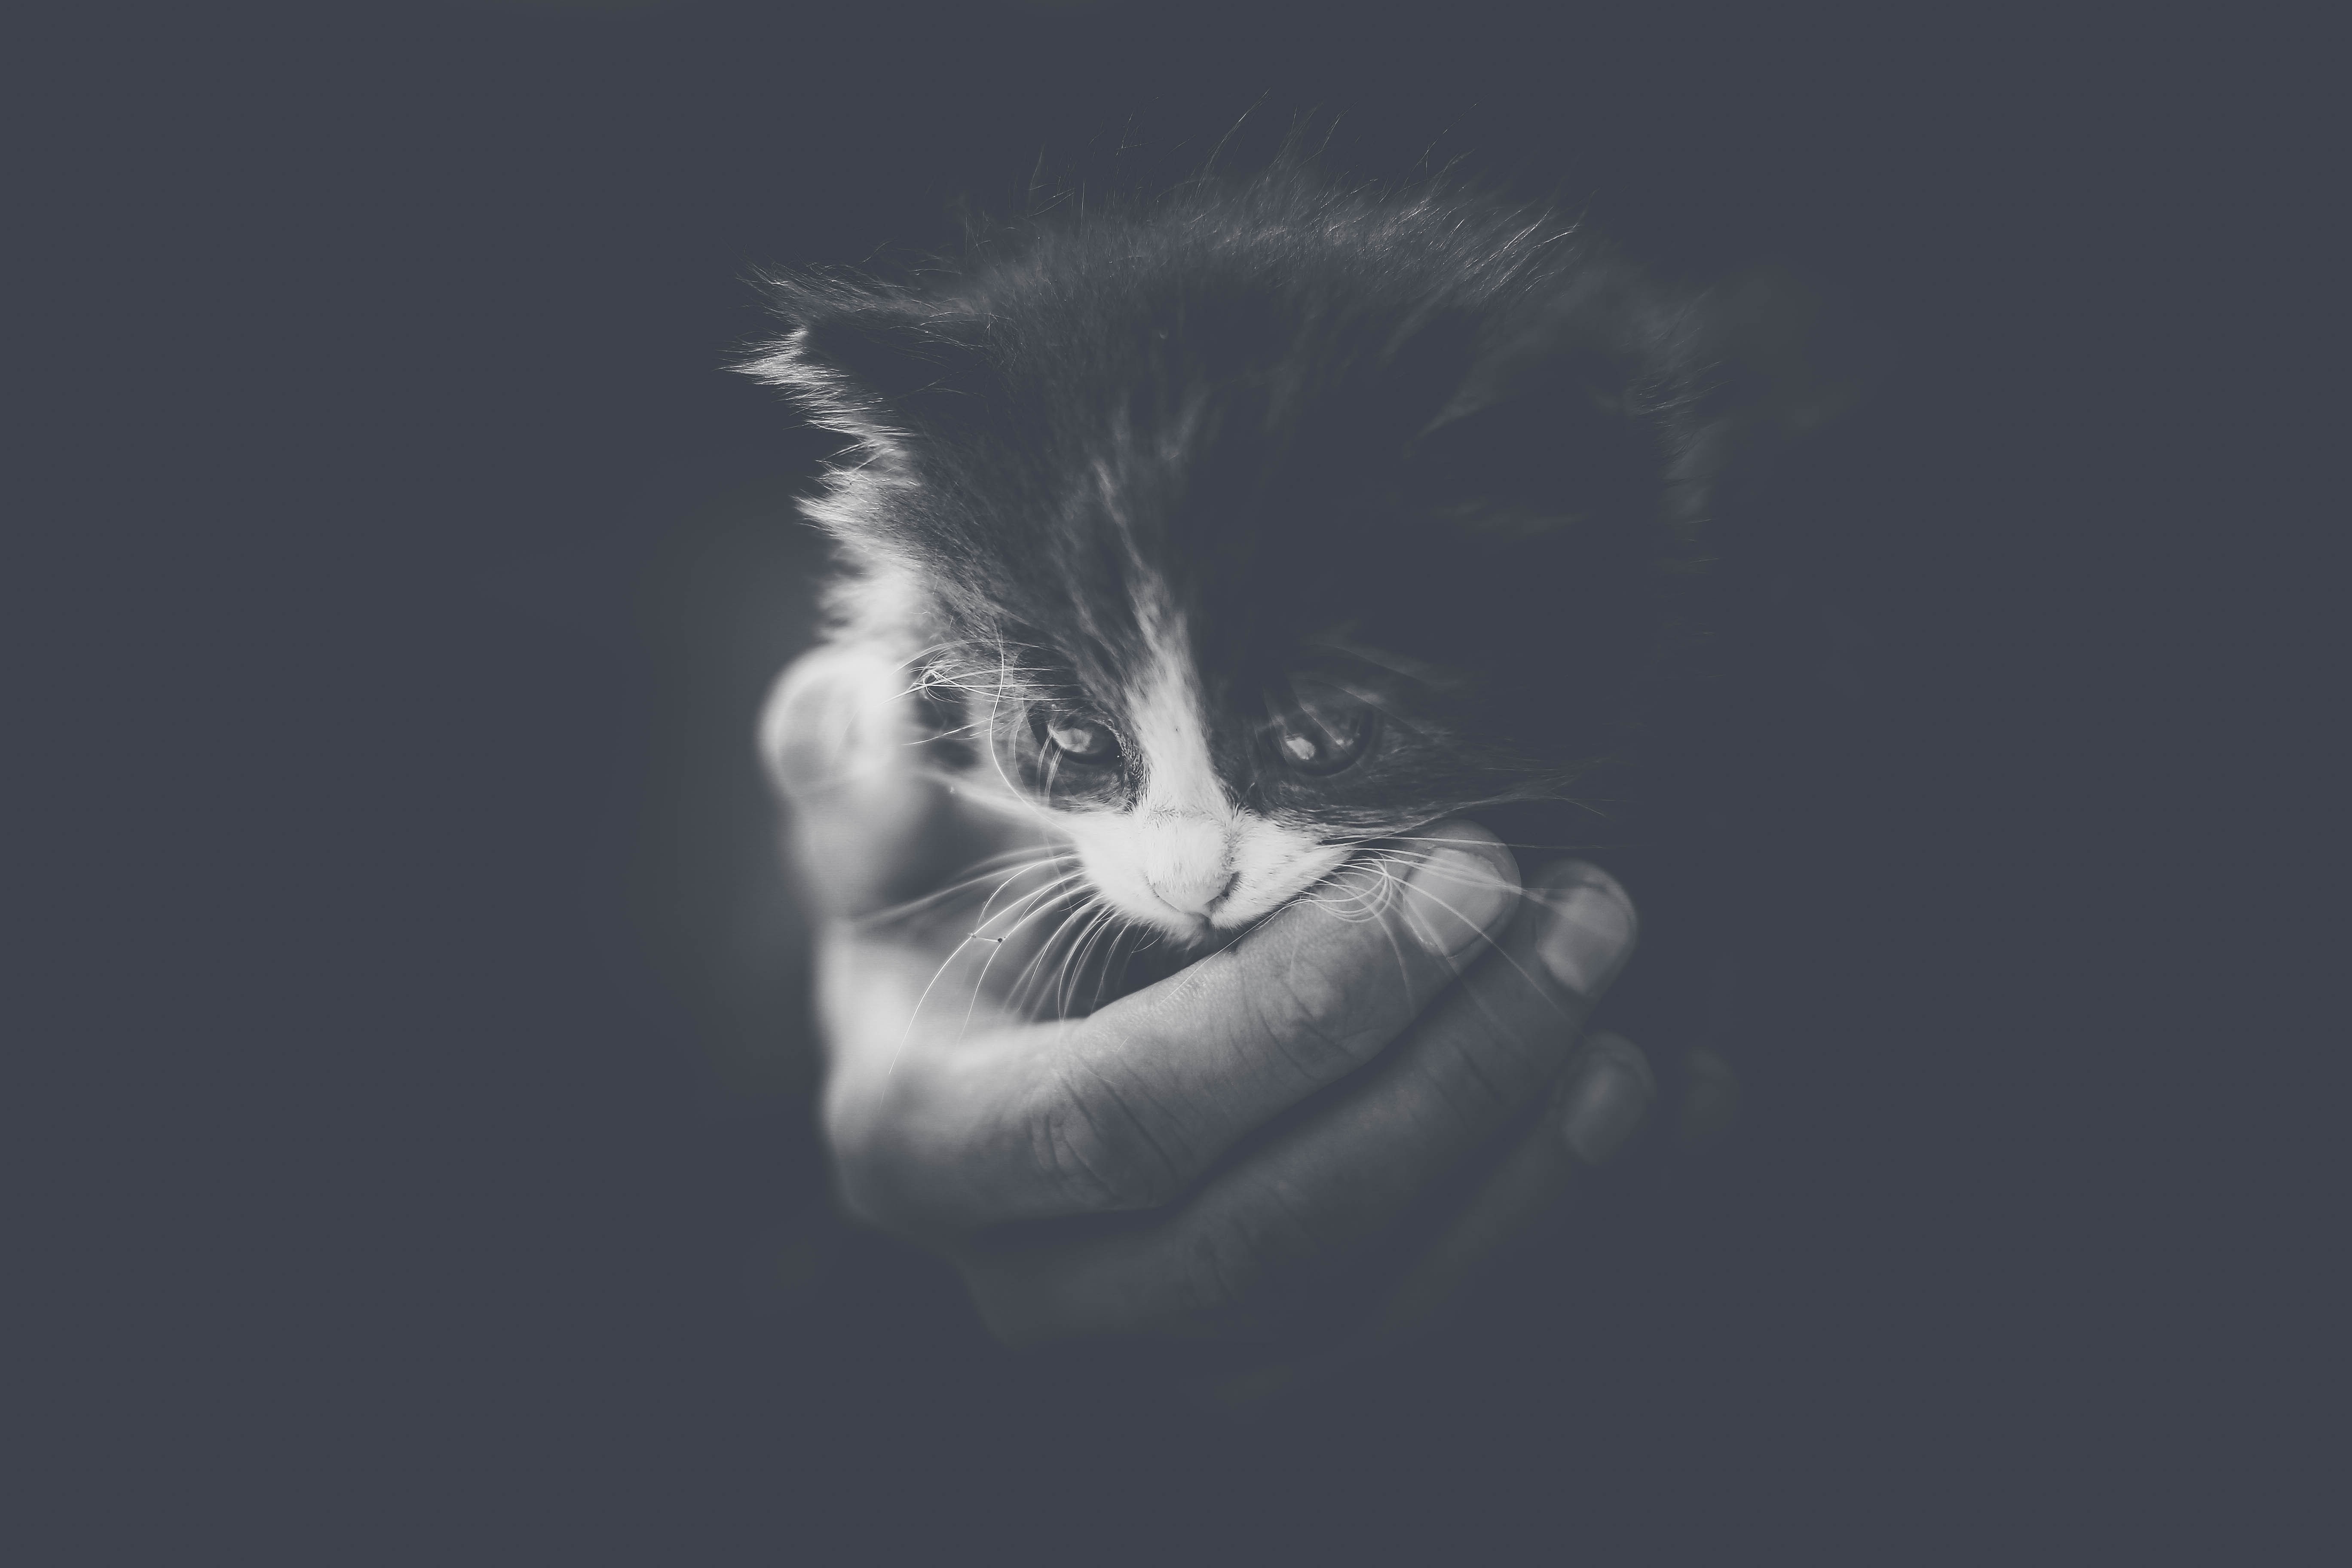 66927 download wallpaper animals, hand, cat, young, kitty, kitten, bw, chb, joey, small screensavers and pictures for free